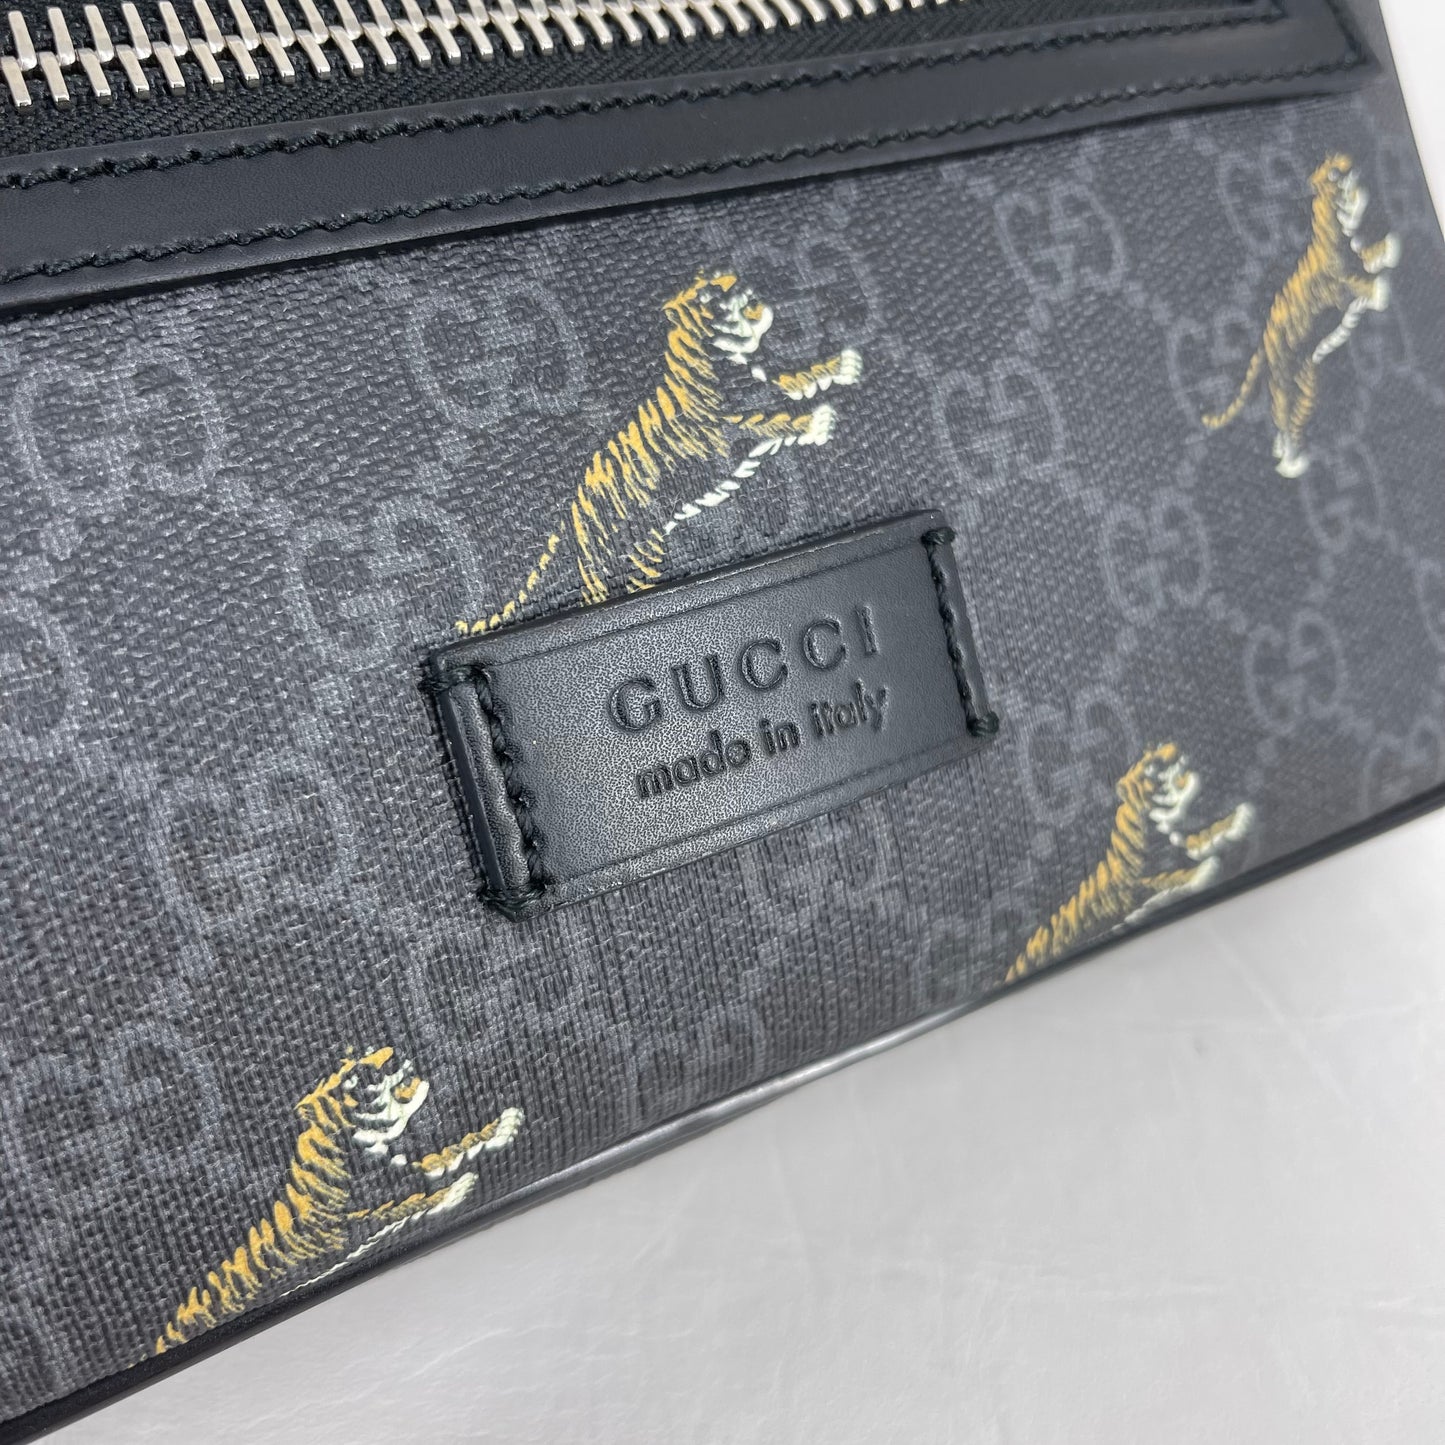 Authentic Gucci Black Beastiary Tiger Bum Bag